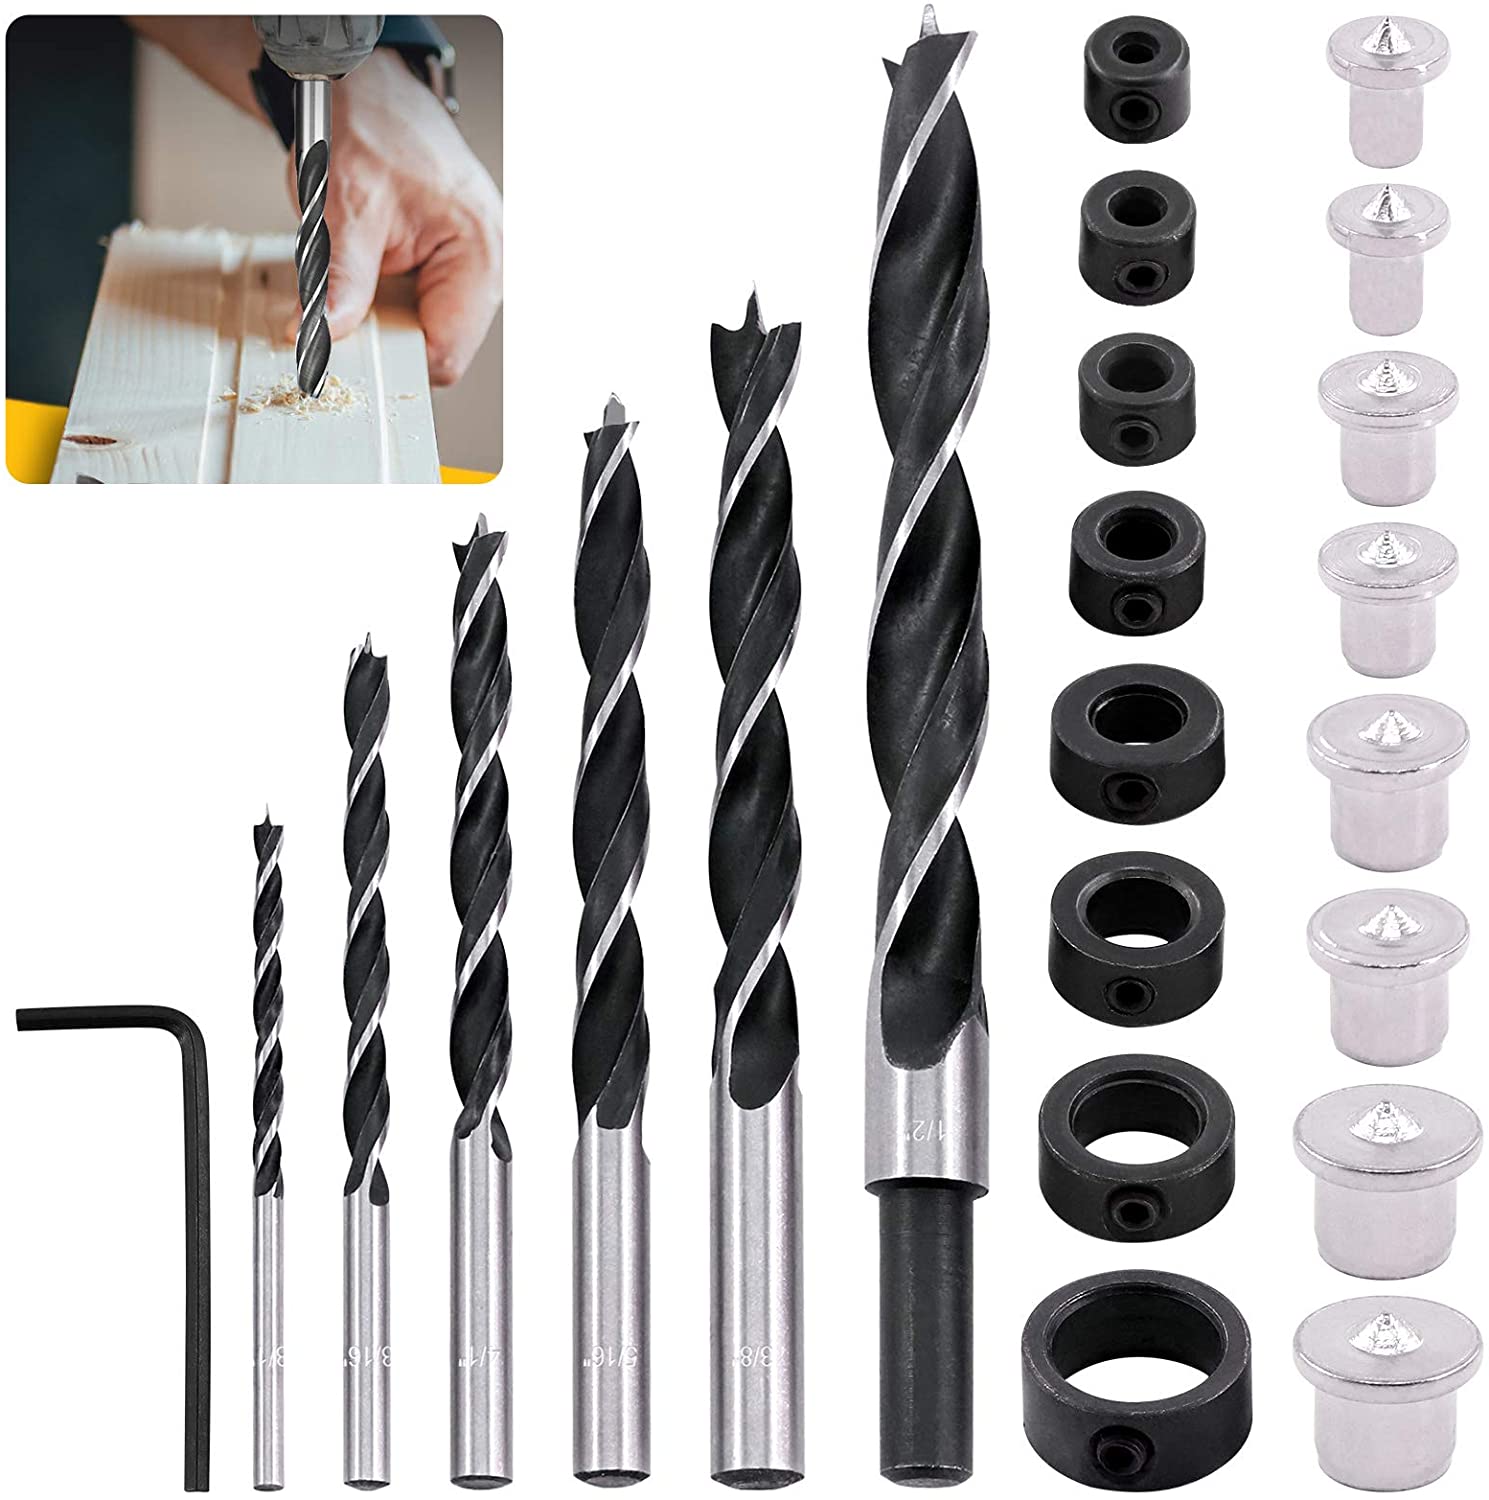 23 Pcs Wood Drill Bit Set with Dowel Pins Center Point and Stopper, Woodworking Brad Point Bit Set Plugs Drill Hole Tool Perfect For Woodworking Carpentry Drilling